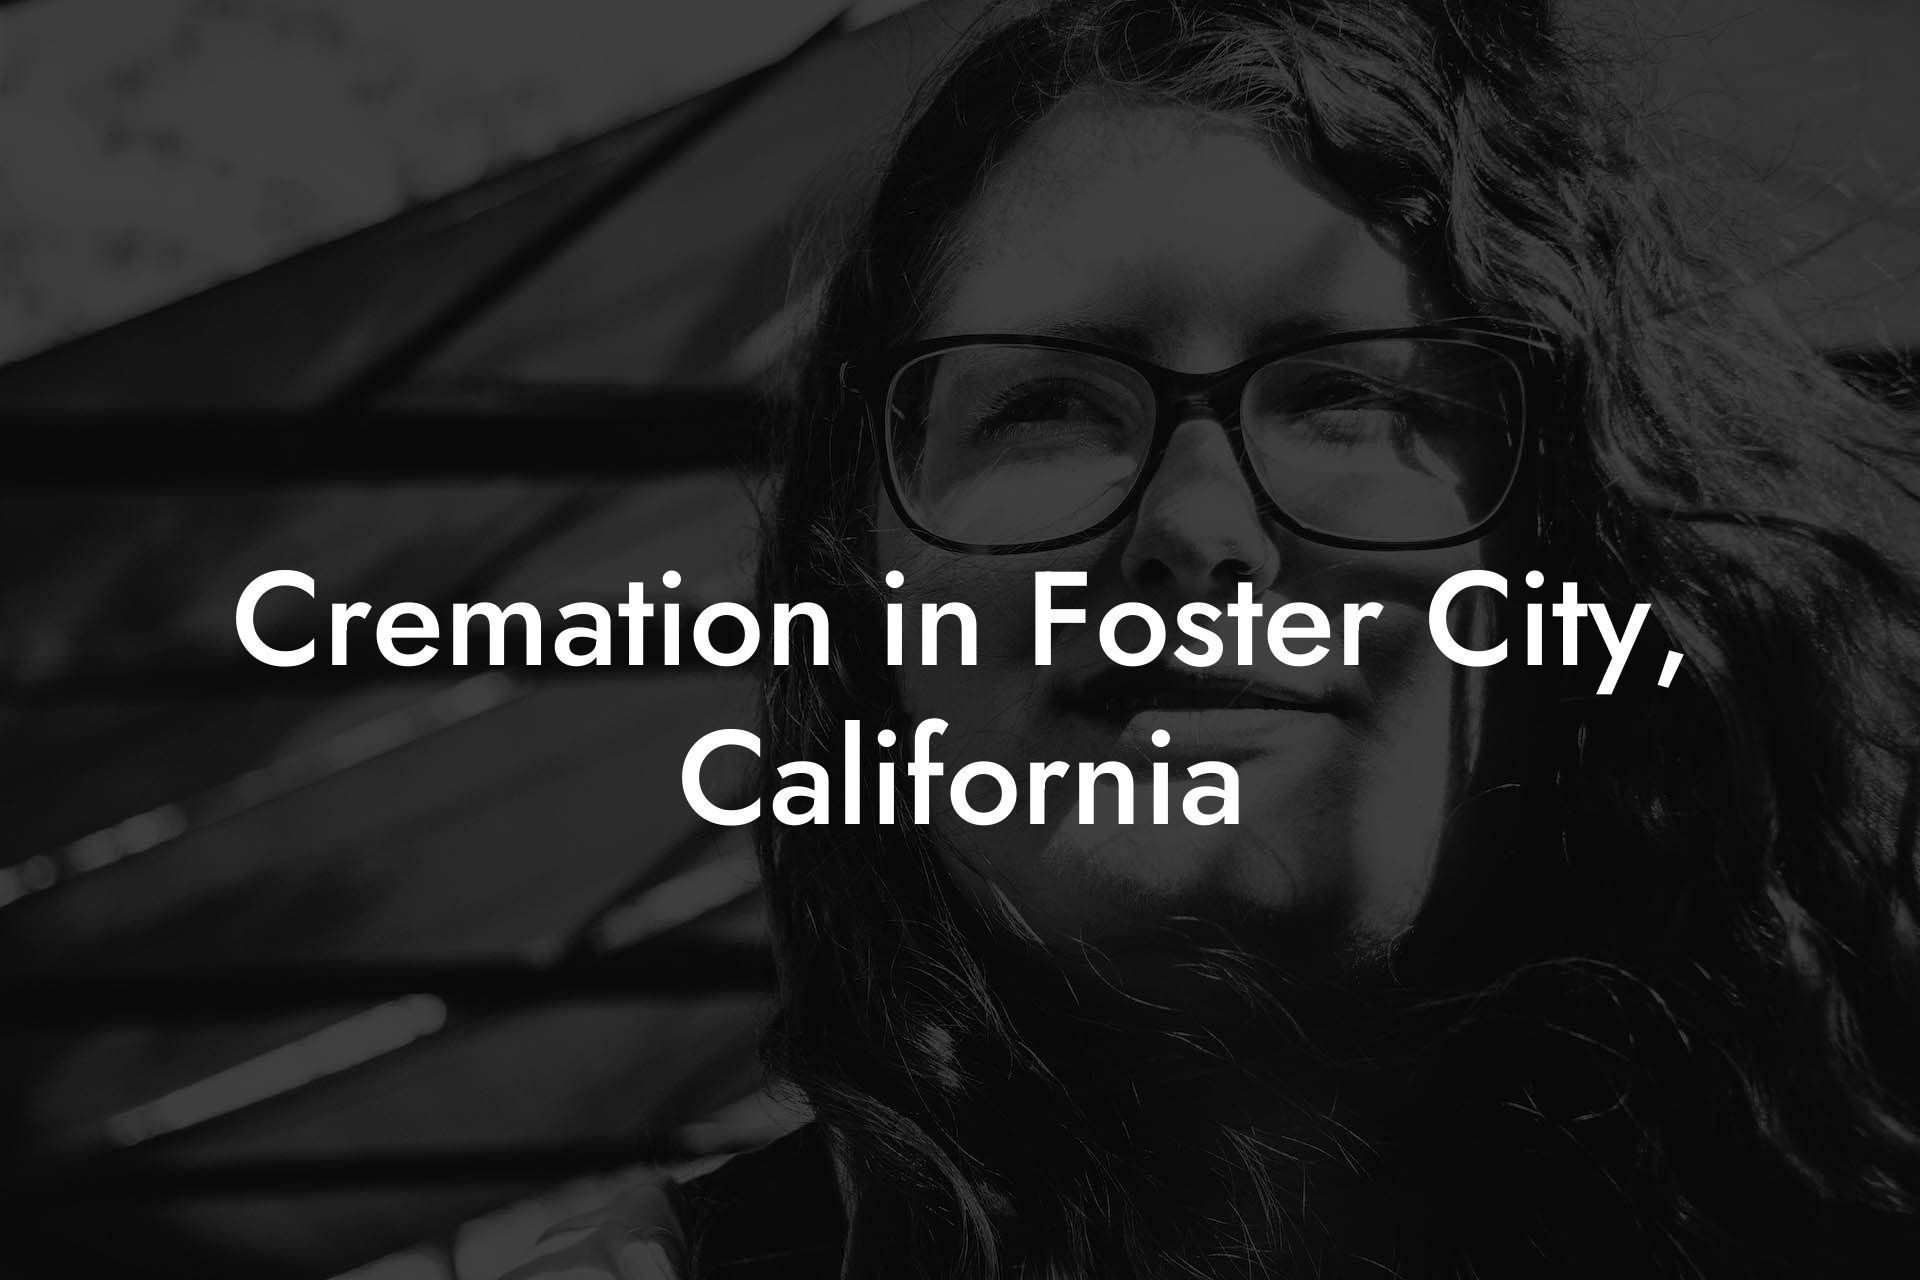 Cremation in Foster City, California